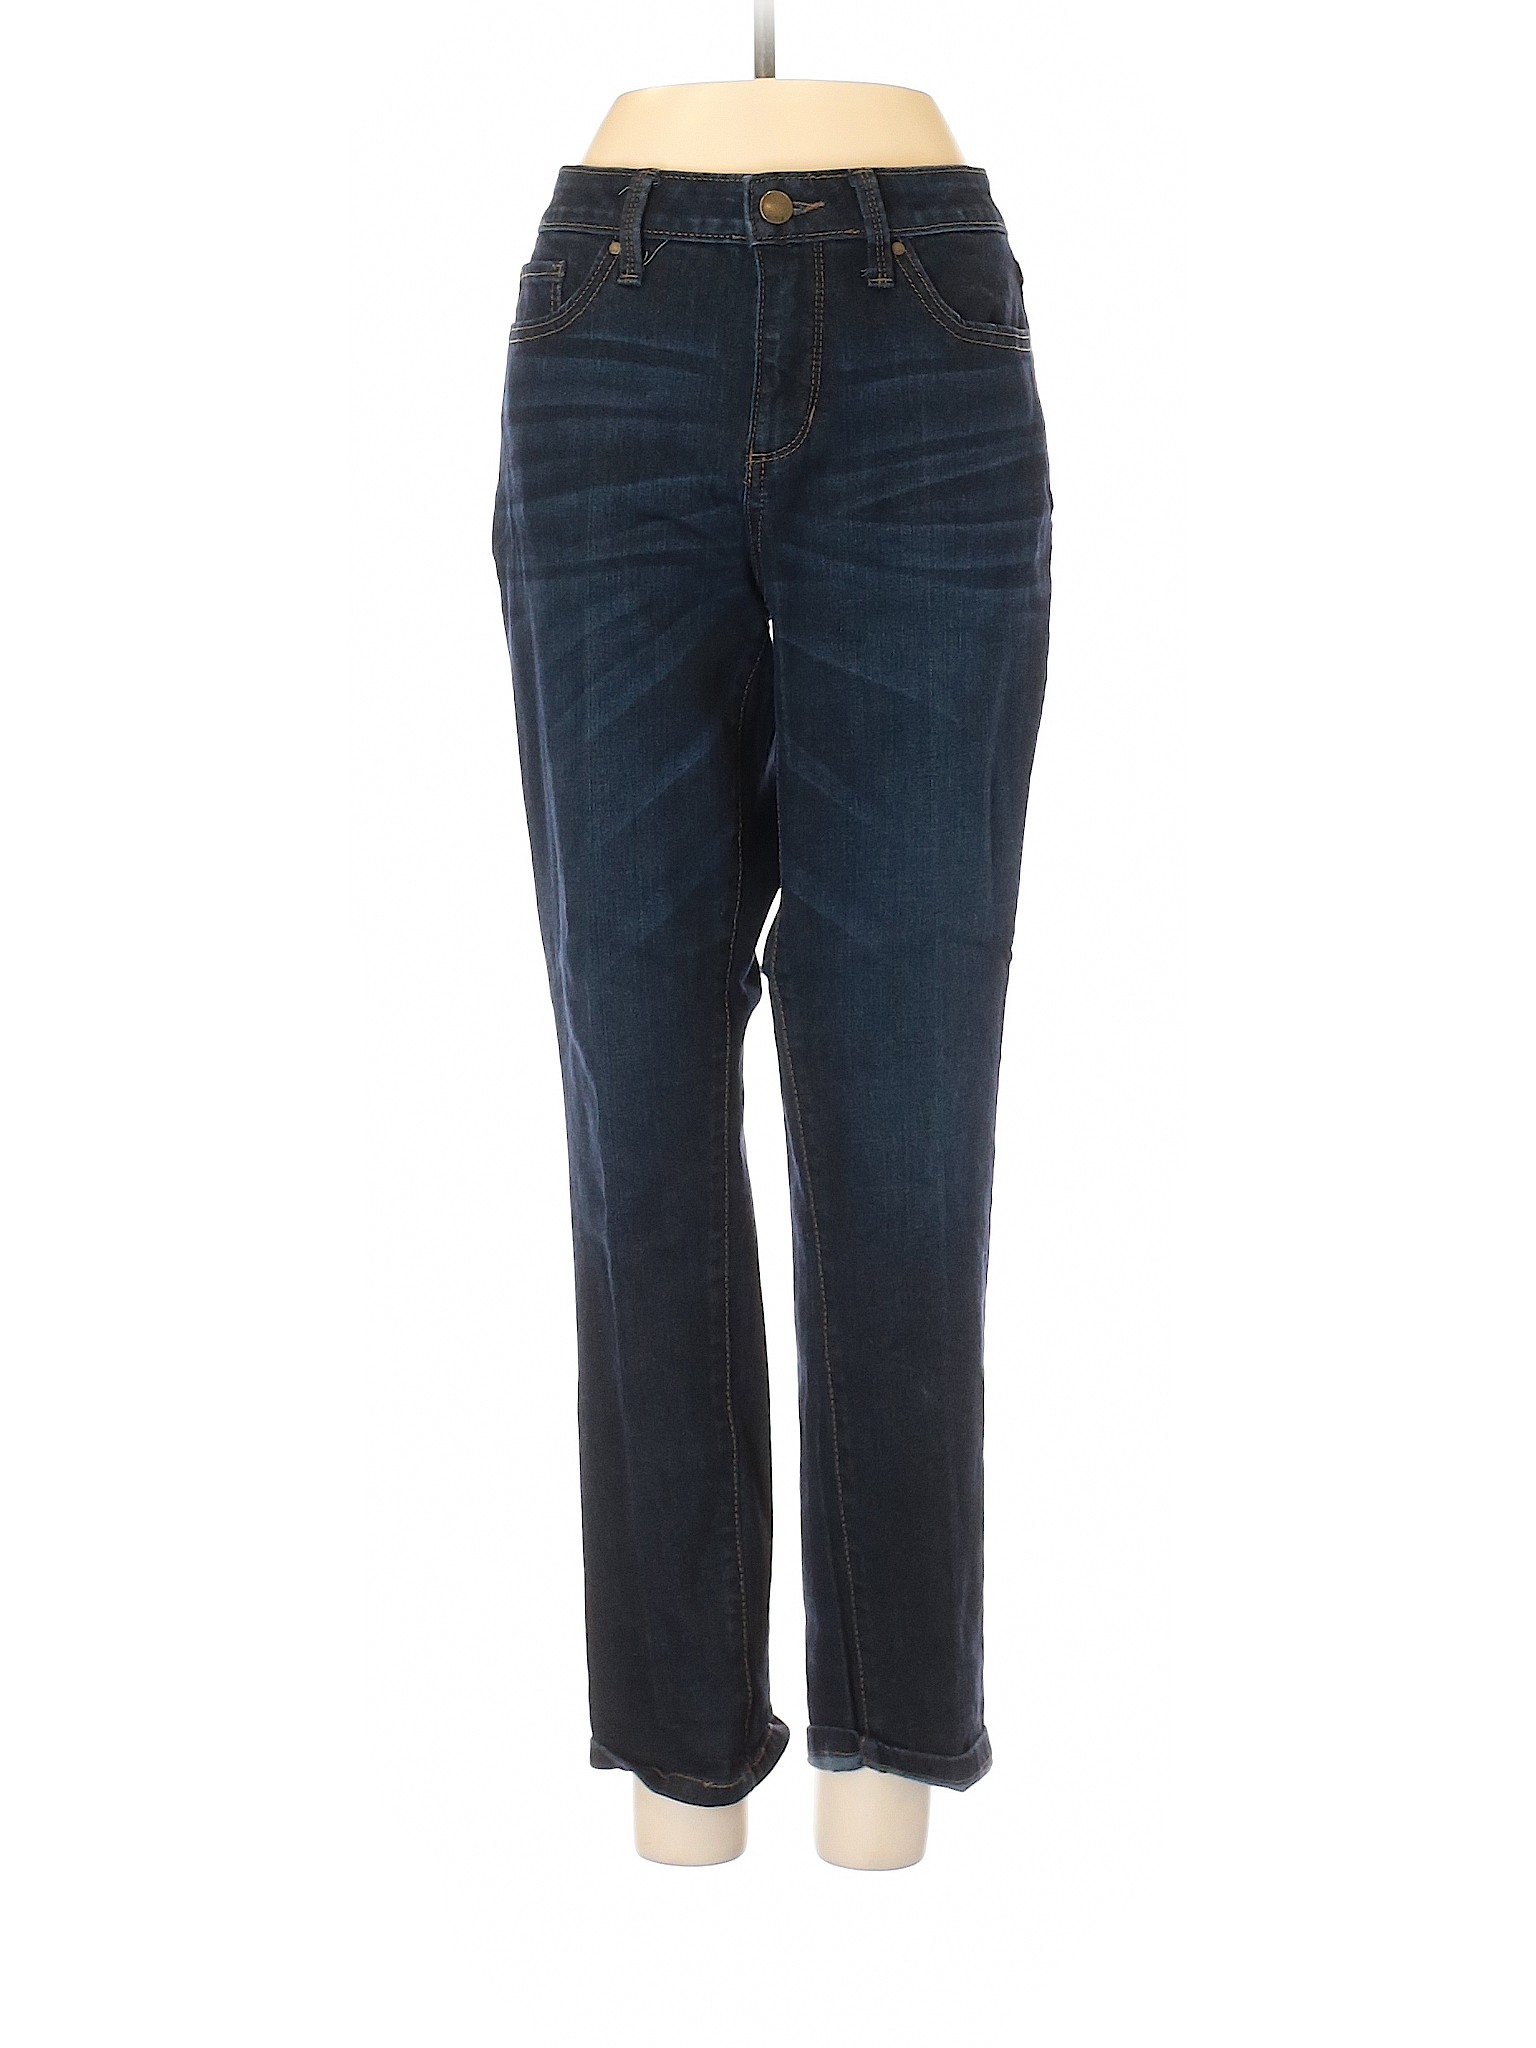 a.n.a. A New Approach Solid Blue Jeans Size 8 - 85% off | thredUP